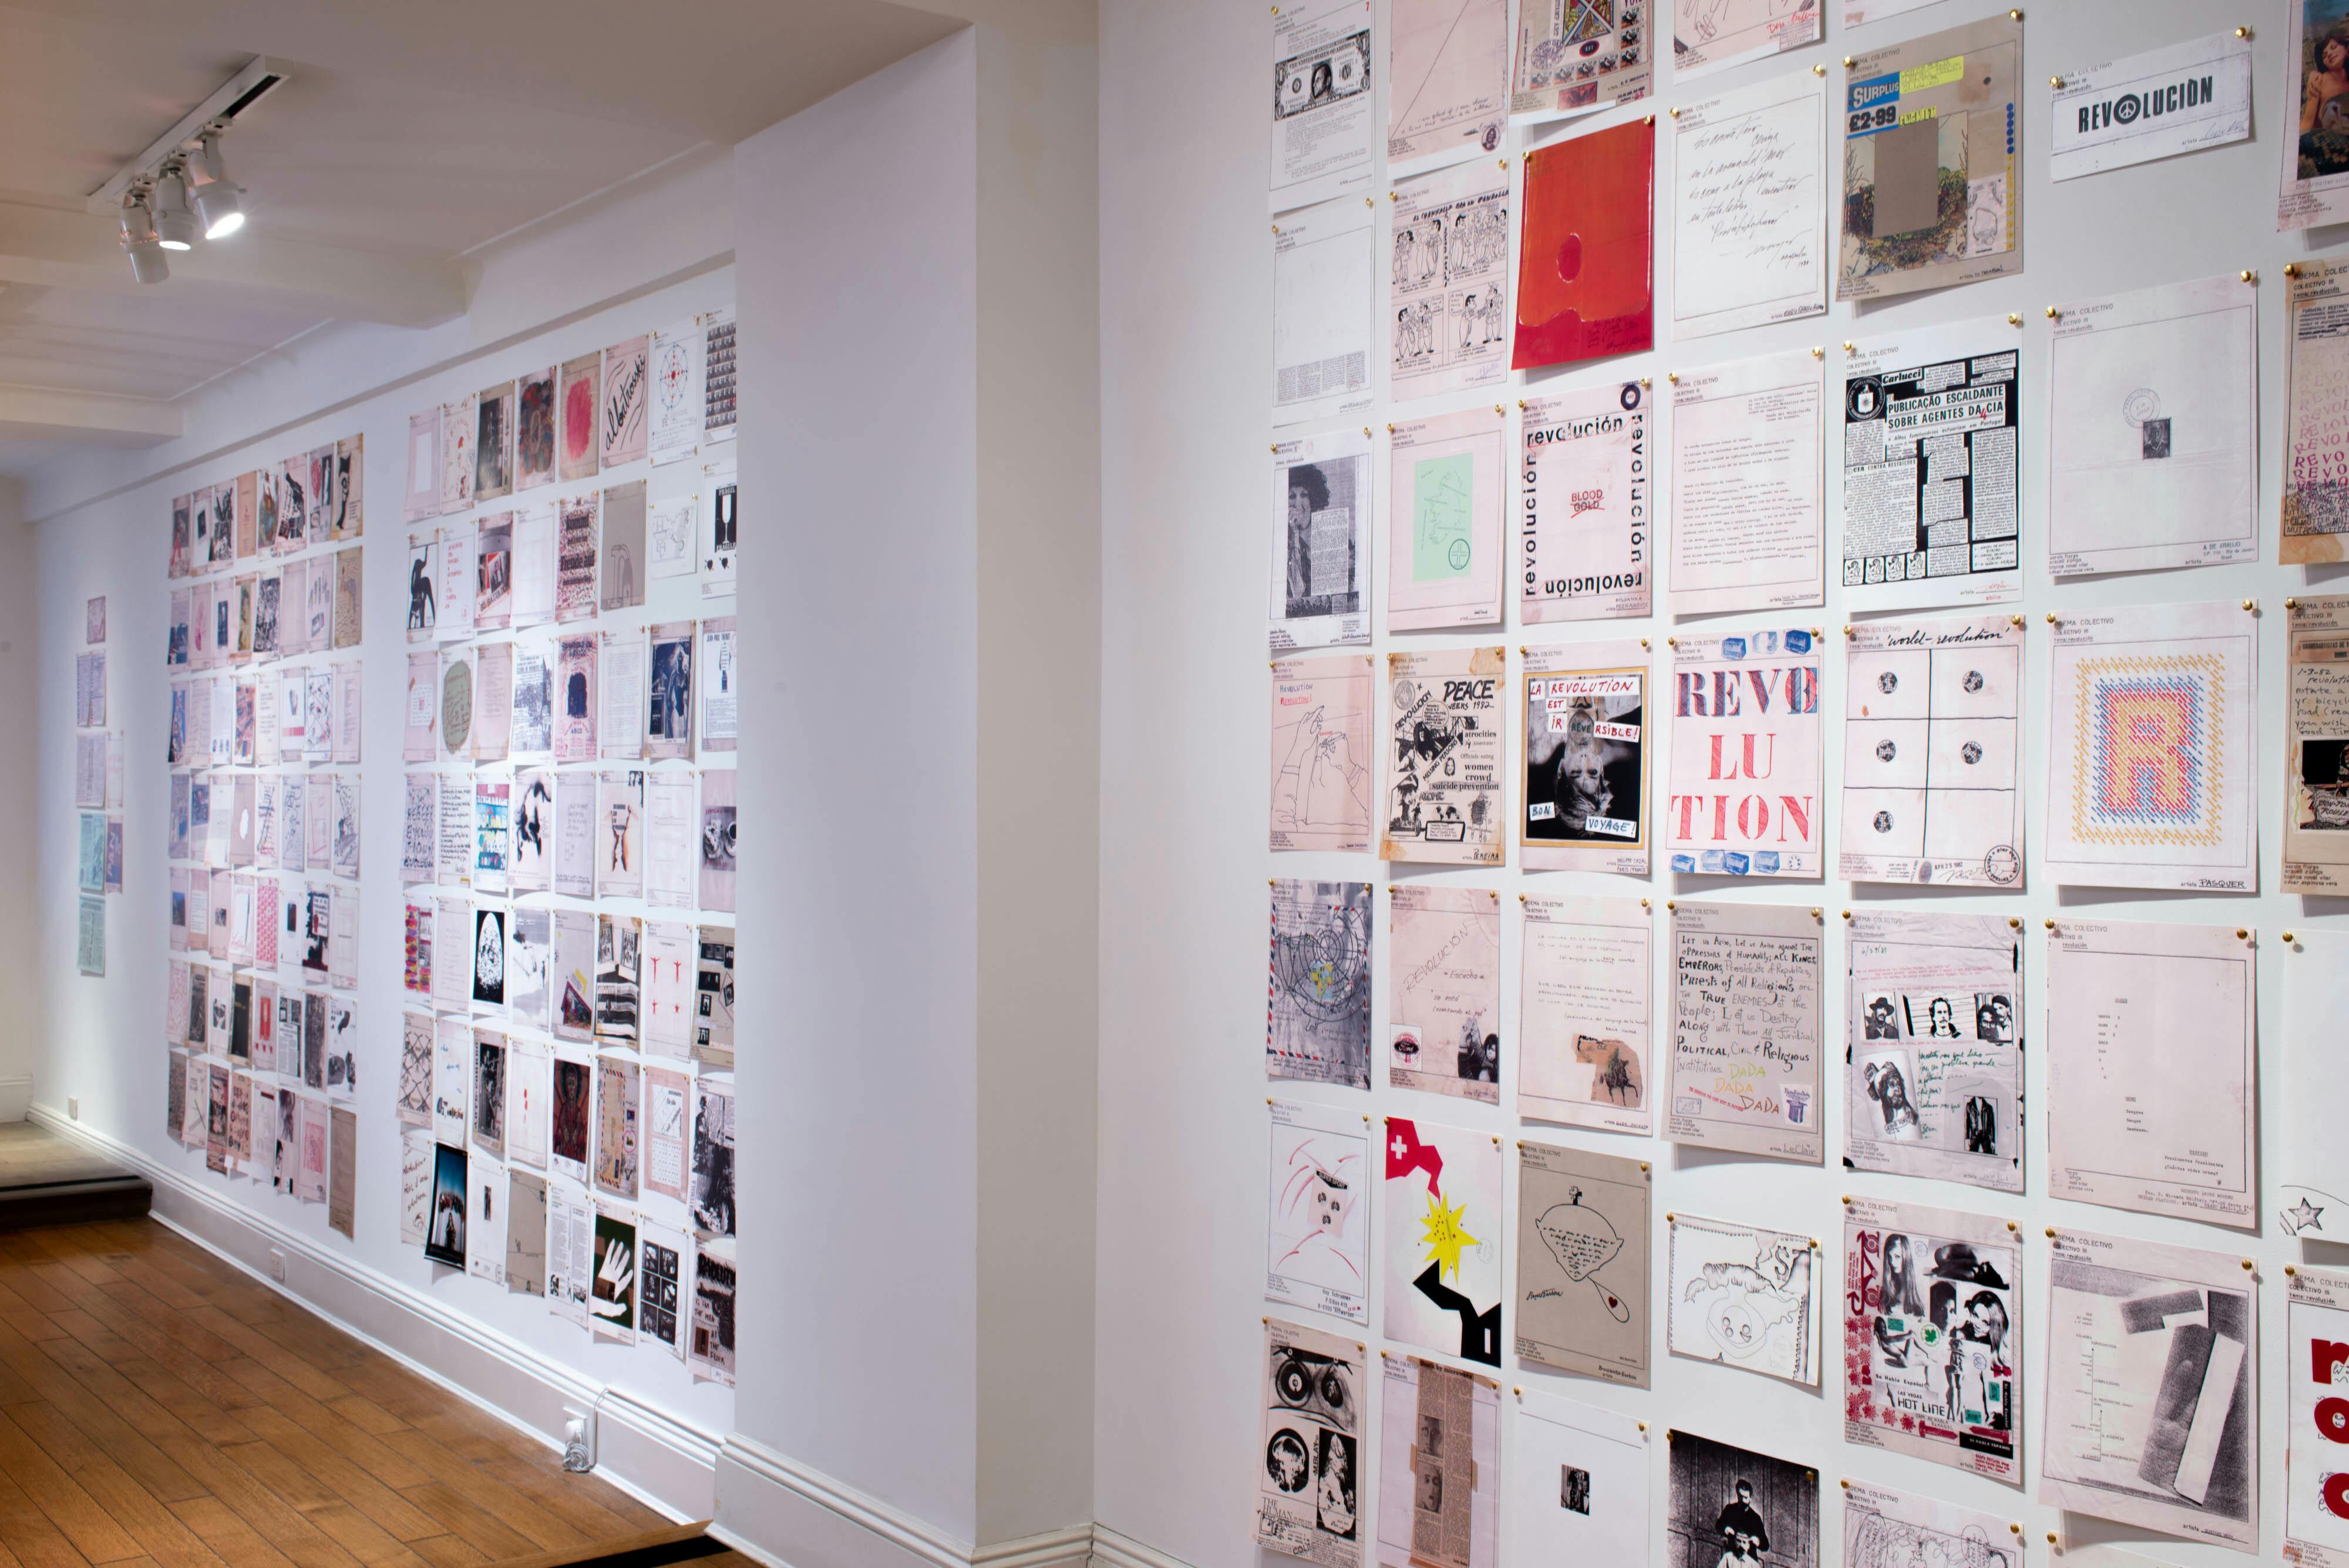 Installation view of Poema Colectivo Revolución exhibition showing collages of the same size arranged in a grid covering the gallery wall.